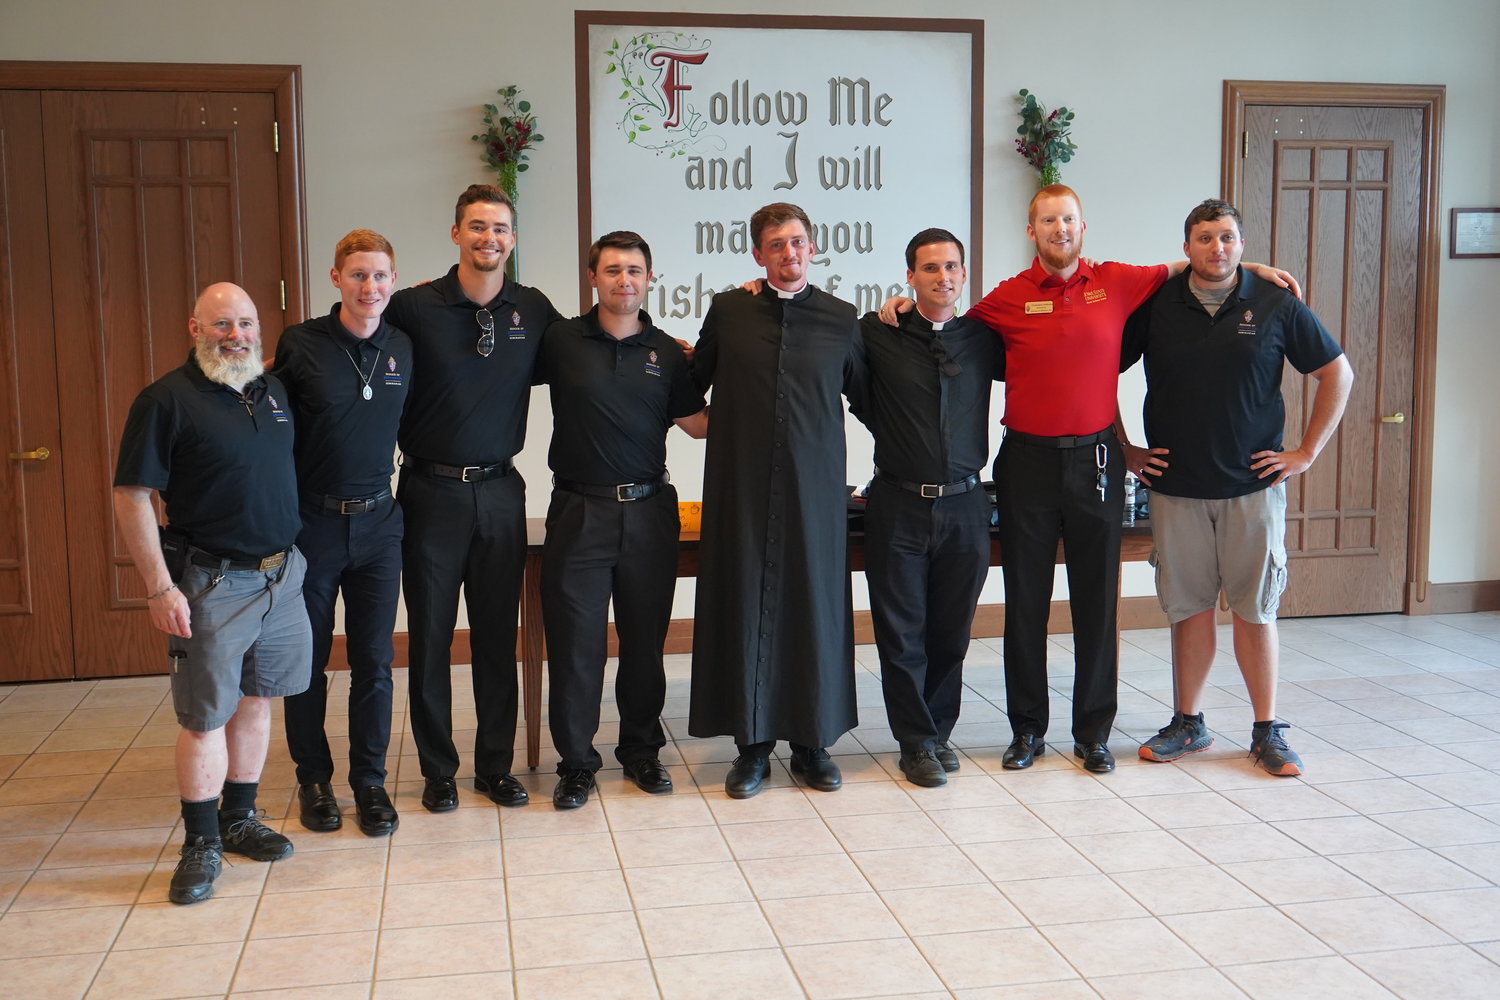 Seminarians Philip Novotney, Gage Niesen, Shane Kliethermes, John-Paul McGuire, Jacob Hartman, Gregory Clever, Christopher Hoffman and Bryce Smith of the Jefferson City diocese gather for a photo after the Aug. 6 Mass in St. Andrew Church.